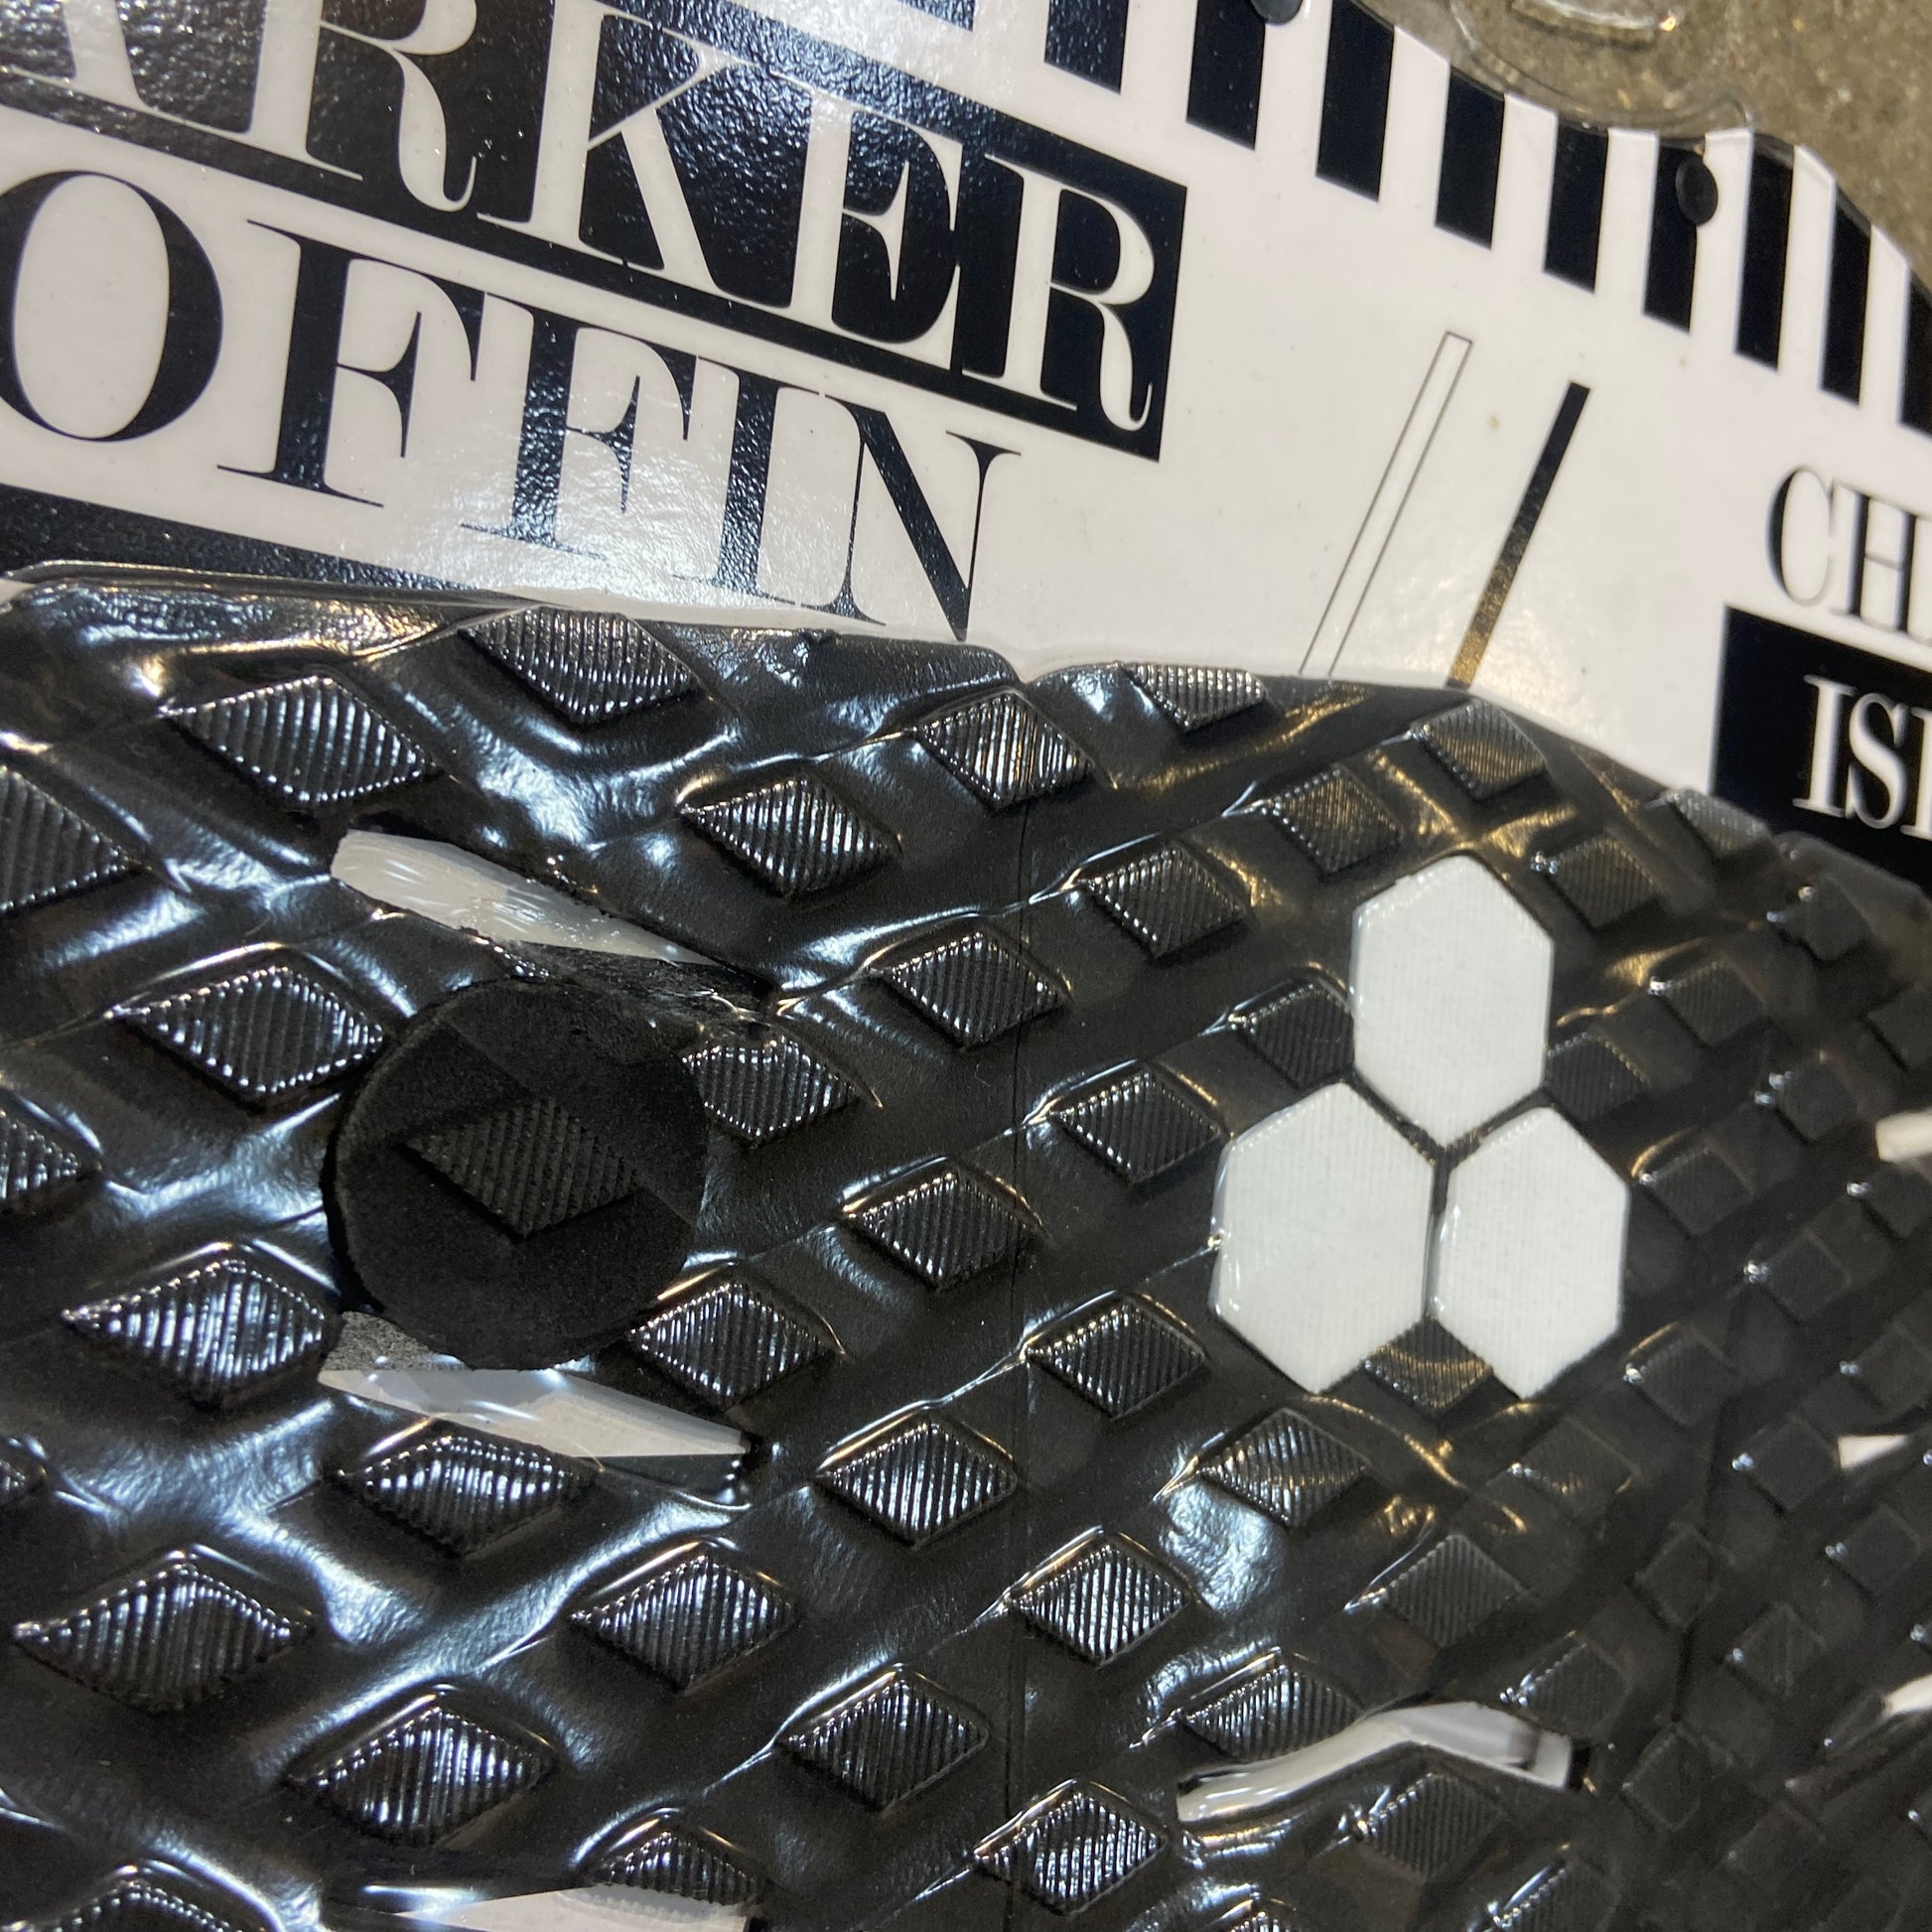 Parker Coffin Signature Traction Pad